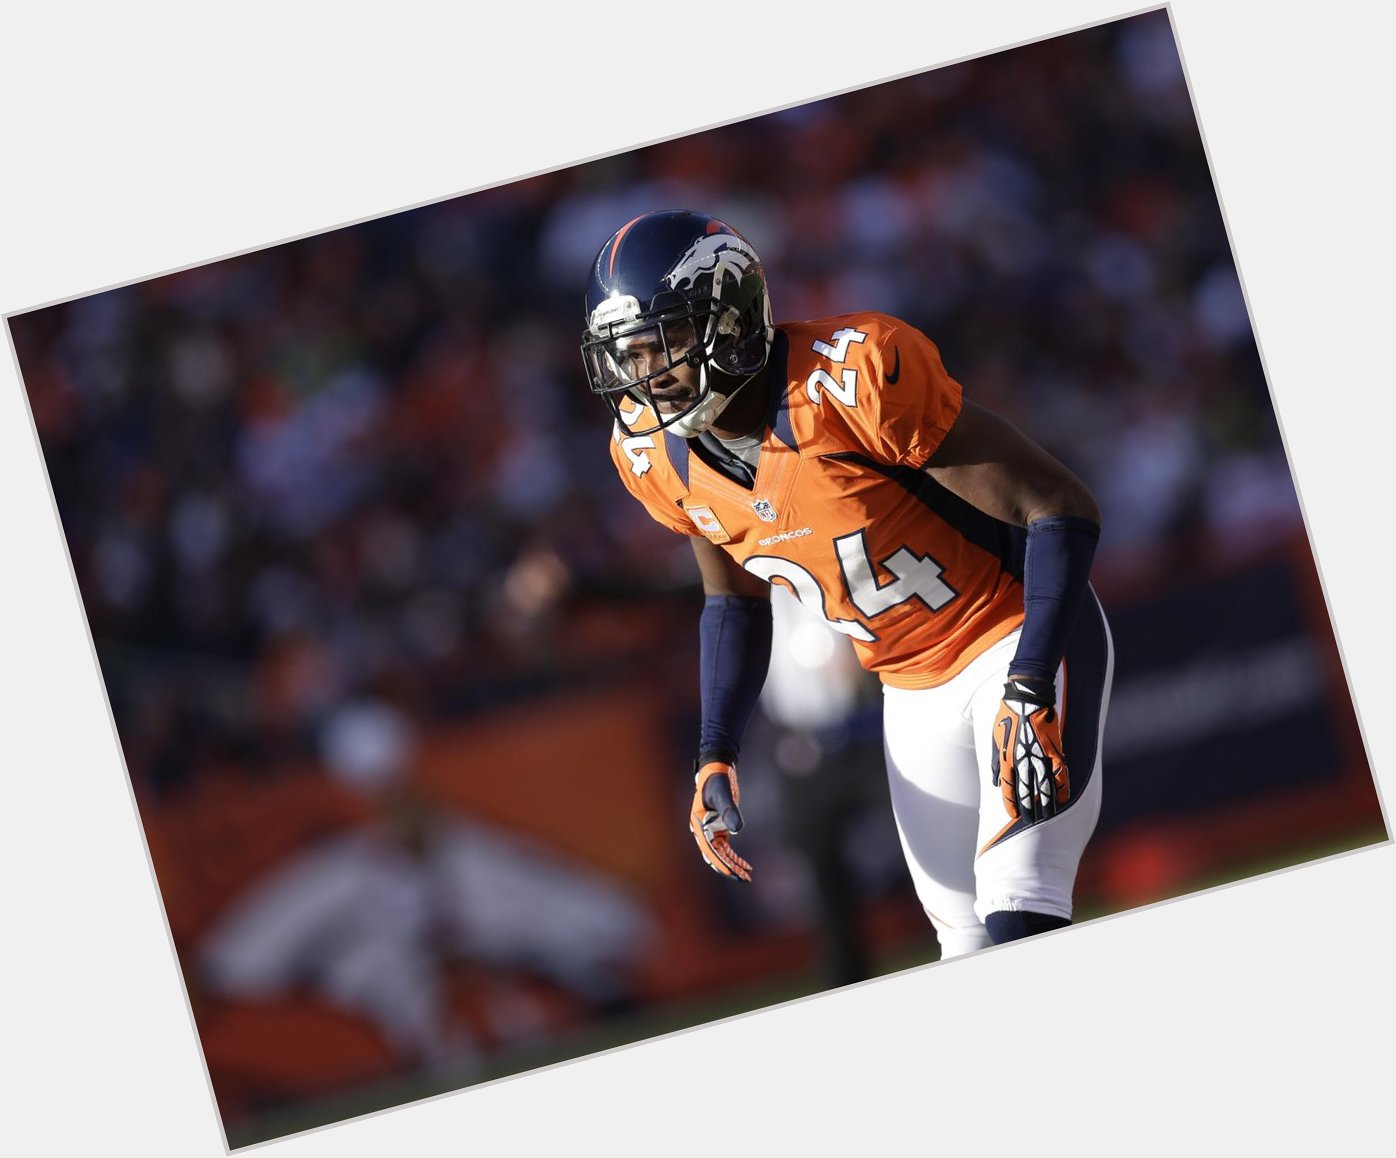 Happy Birthday to future Hall of Famer and Broncos legend Champ Bailey ( 